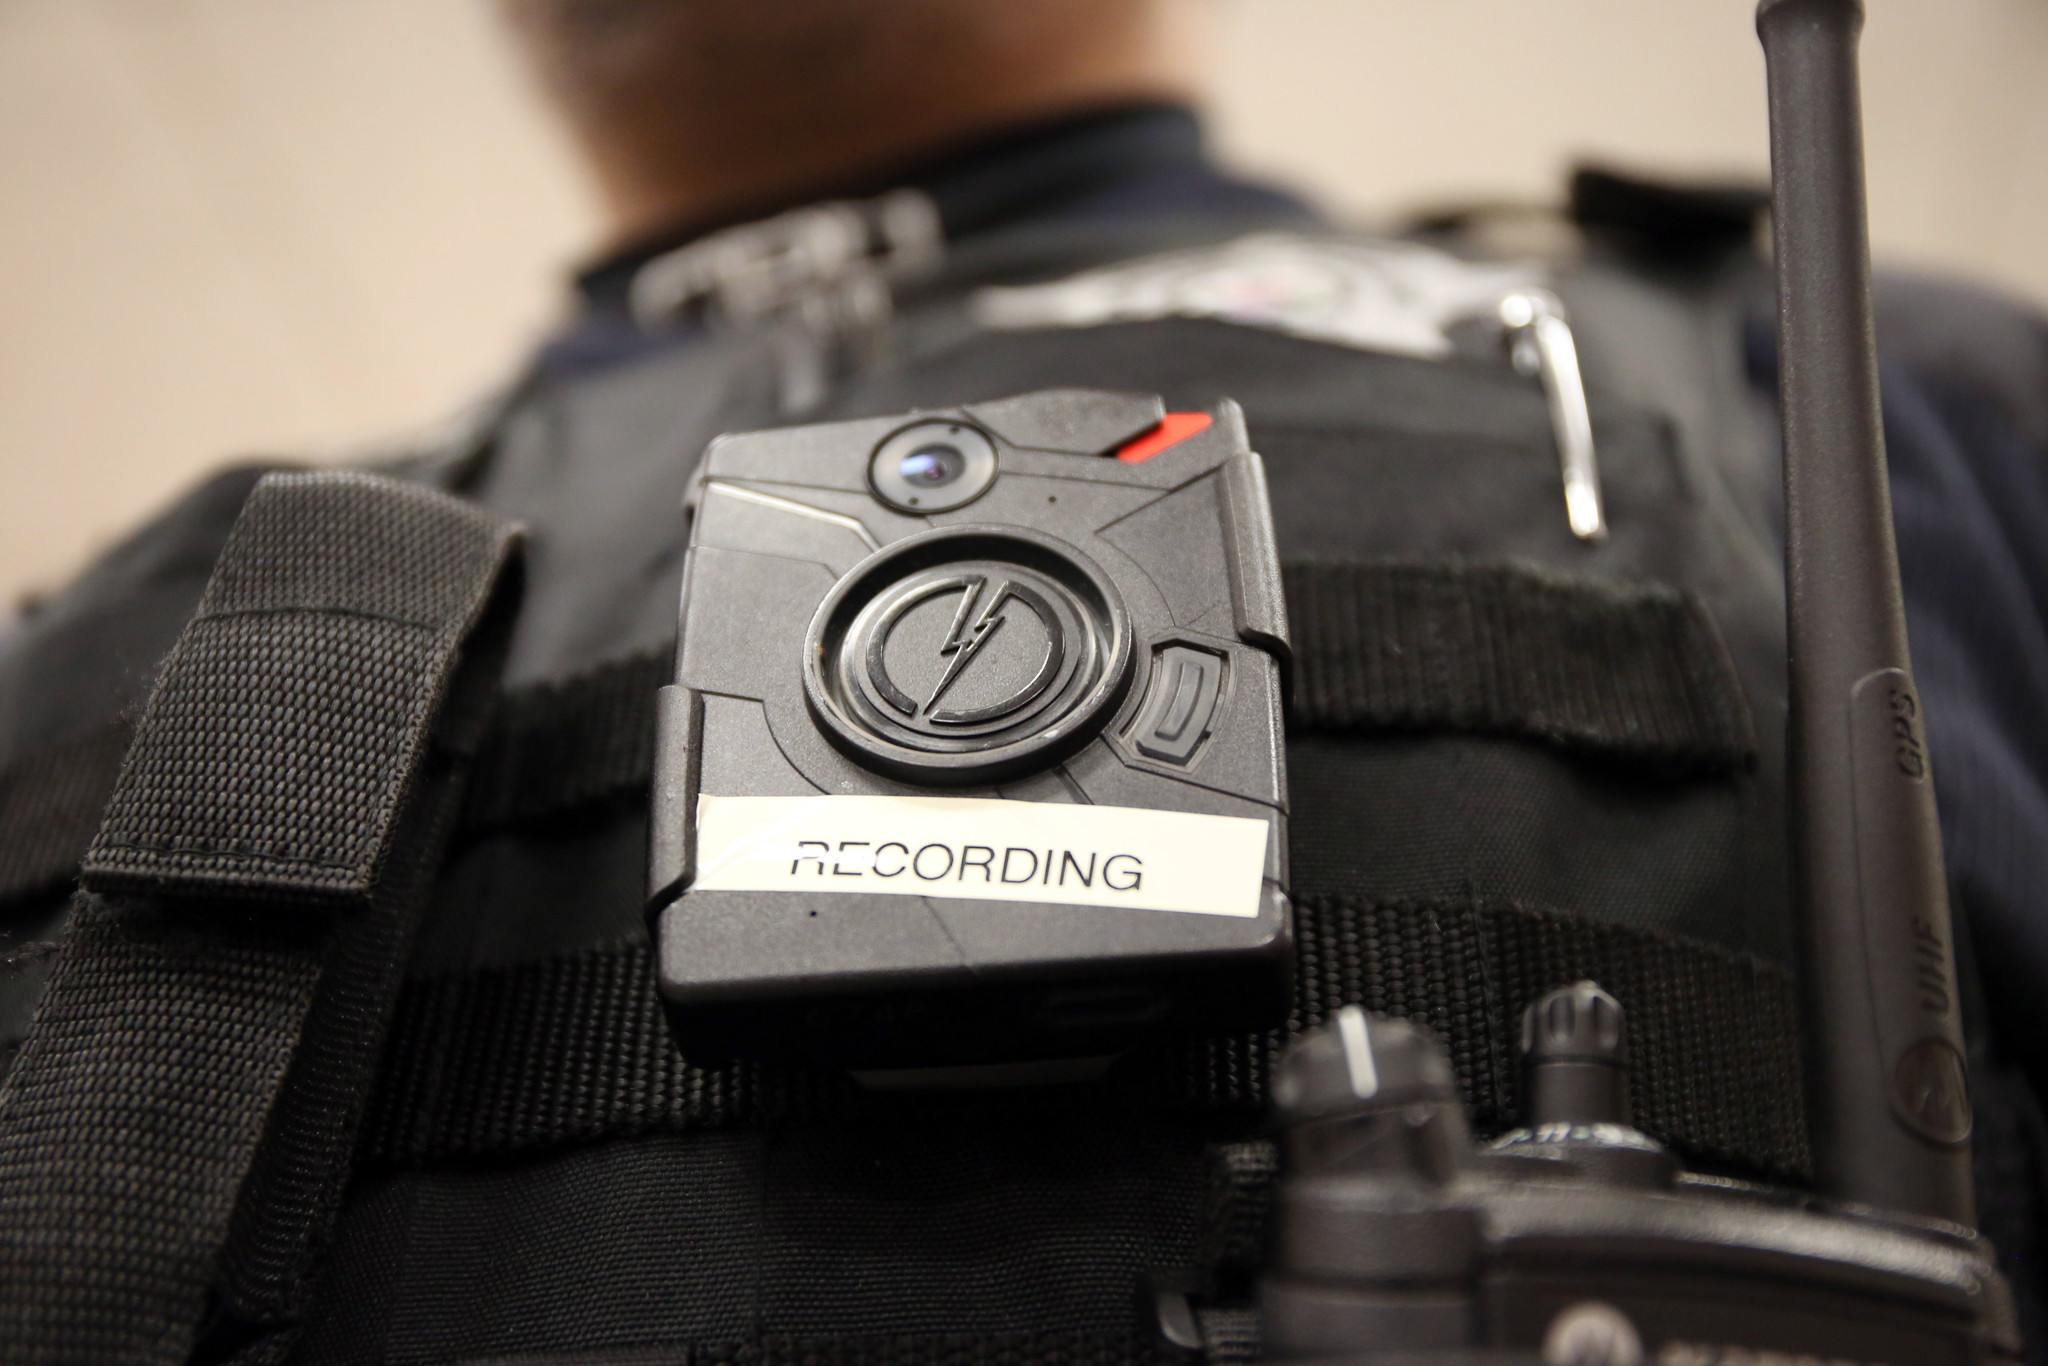 Probation officers to wear body cameras